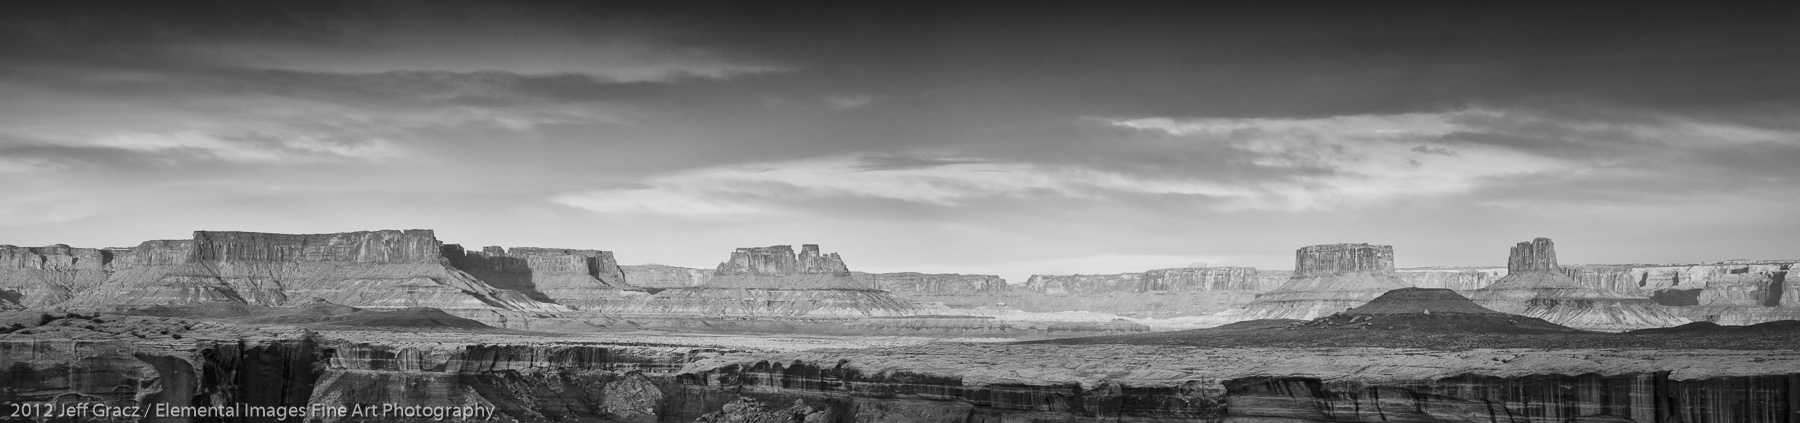 Distant Buttes | Canyonlands National Park | UT | USA - © 2012 Jeff Gracz / Elemental Images Fine Art Photography - All Rights Reserved Worldwide